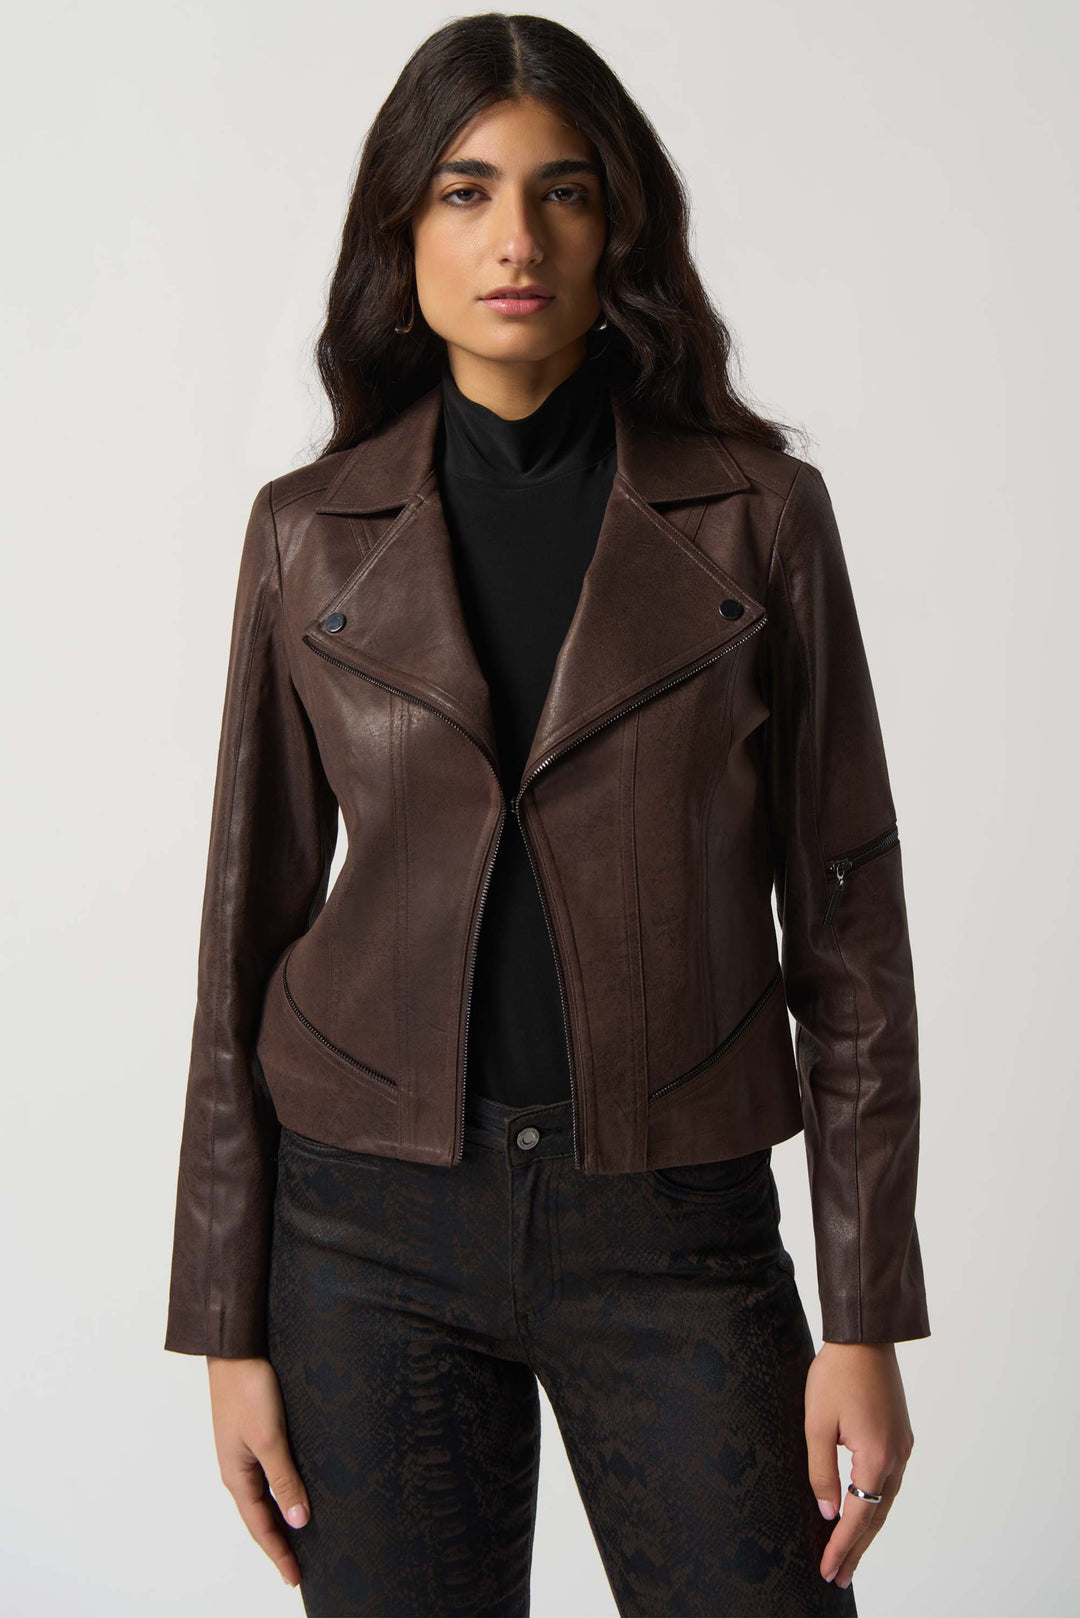 Joseph Ribkoff Fall 2023 women's casual faux suede leather vegan brown moto jacket - front